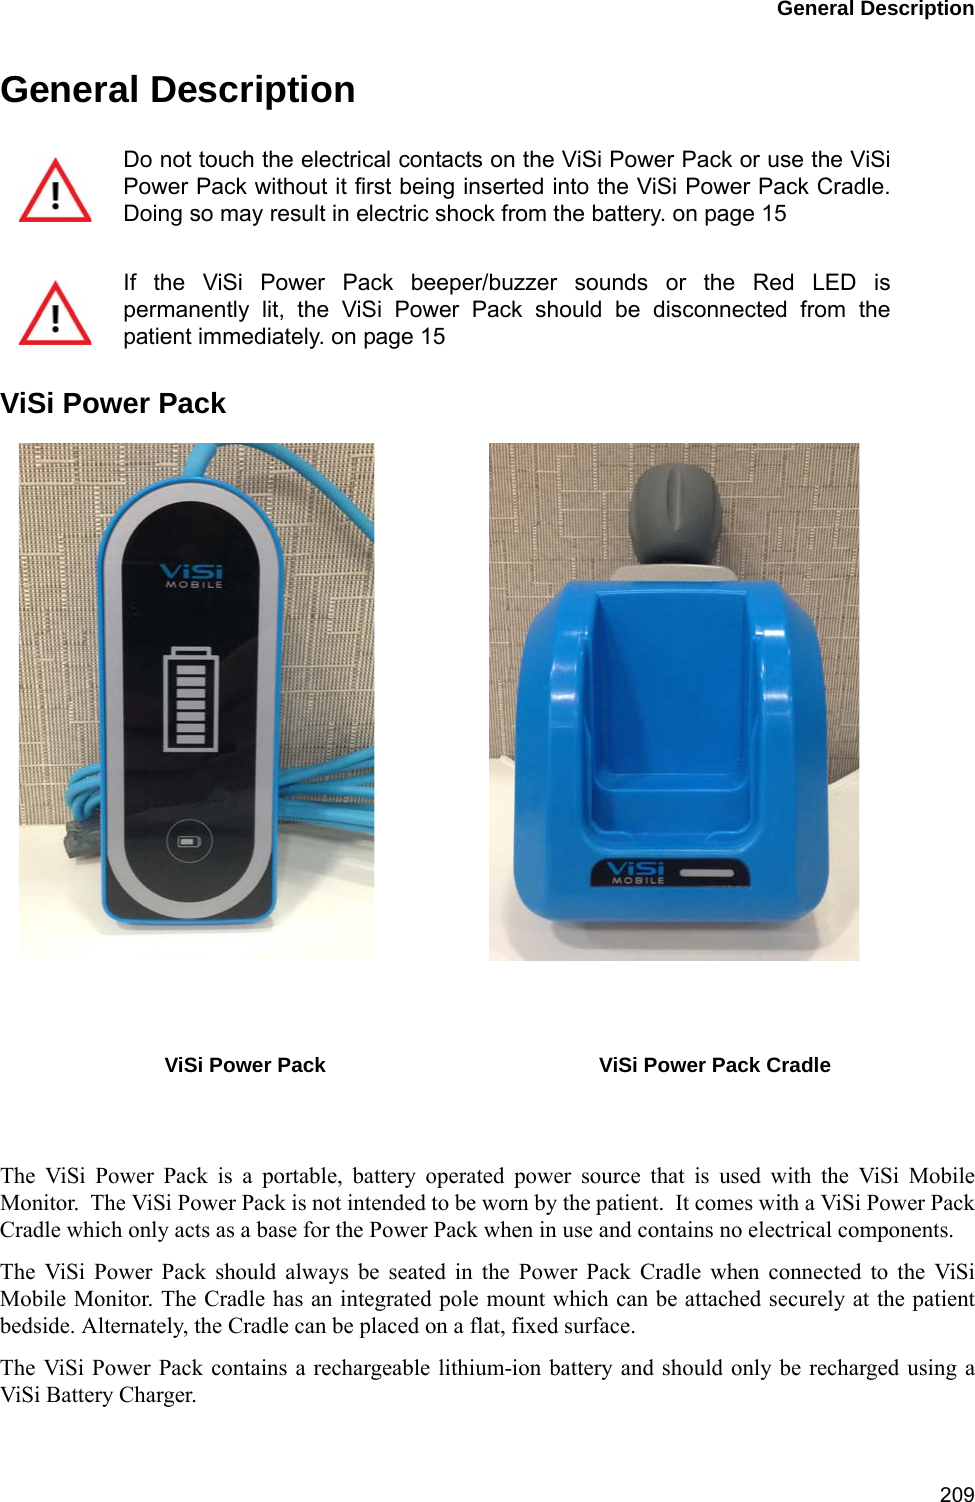 General Description209General DescriptionViSi Power PackThe ViSi Power Pack is a portable, battery operated power source that is used with the ViSi MobileMonitor.  The ViSi Power Pack is not intended to be worn by the patient.  It comes with a ViSi Power PackCradle which only acts as a base for the Power Pack when in use and contains no electrical components. The ViSi Power Pack should always be seated in the Power Pack Cradle when connected to the ViSiMobile Monitor. The Cradle has an integrated pole mount which can be attached securely at the patientbedside. Alternately, the Cradle can be placed on a flat, fixed surface.The ViSi Power Pack contains a rechargeable lithium-ion battery and should only be recharged using aViSi Battery Charger. Do not touch the electrical contacts on the ViSi Power Pack or use the ViSiPower Pack without it first being inserted into the ViSi Power Pack Cradle.Doing so may result in electric shock from the battery. on page 15If the ViSi Power Pack beeper/buzzer sounds or the Red LED ispermanently lit, the ViSi Power Pack should be disconnected from thepatient immediately. on page 15ViSi Power Pack ViSi Power Pack Cradle